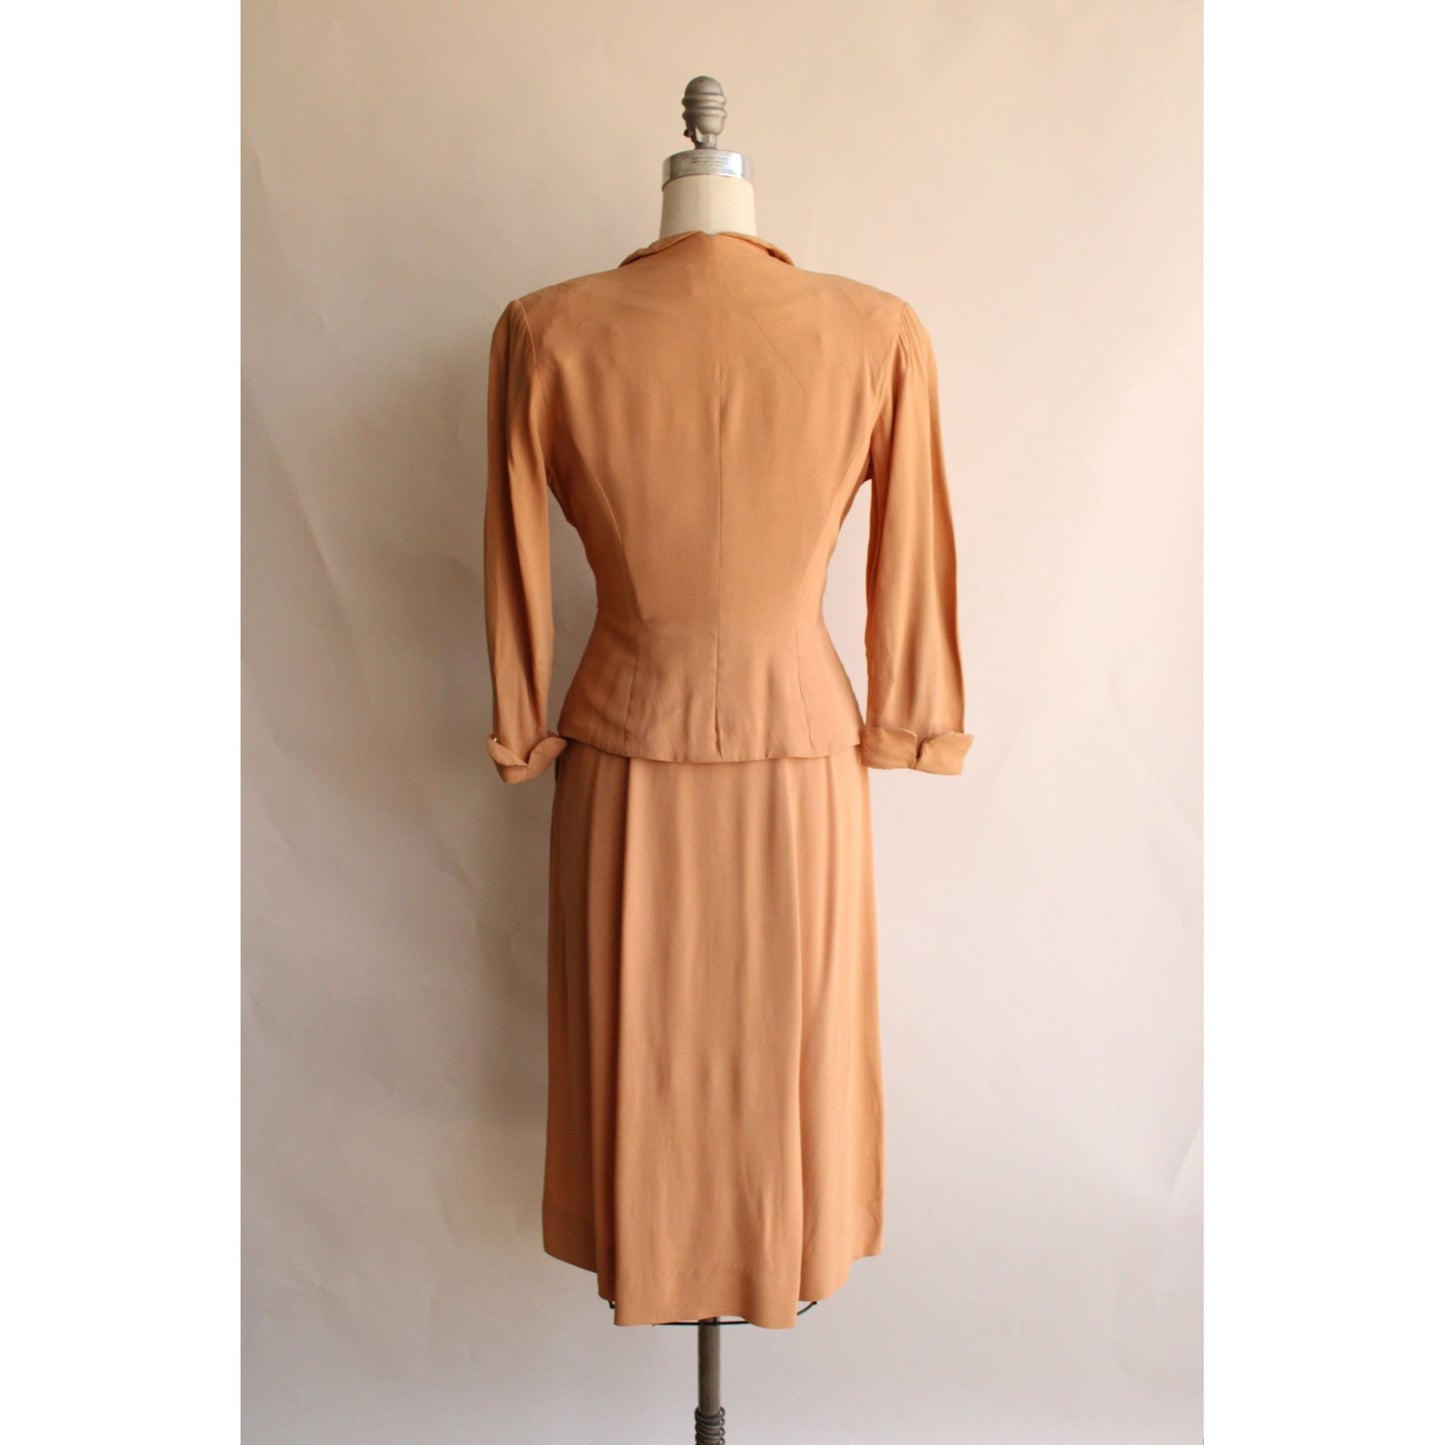 Vintage 1950s Franklin Chicago Dress and Jacket Two Piece Suit